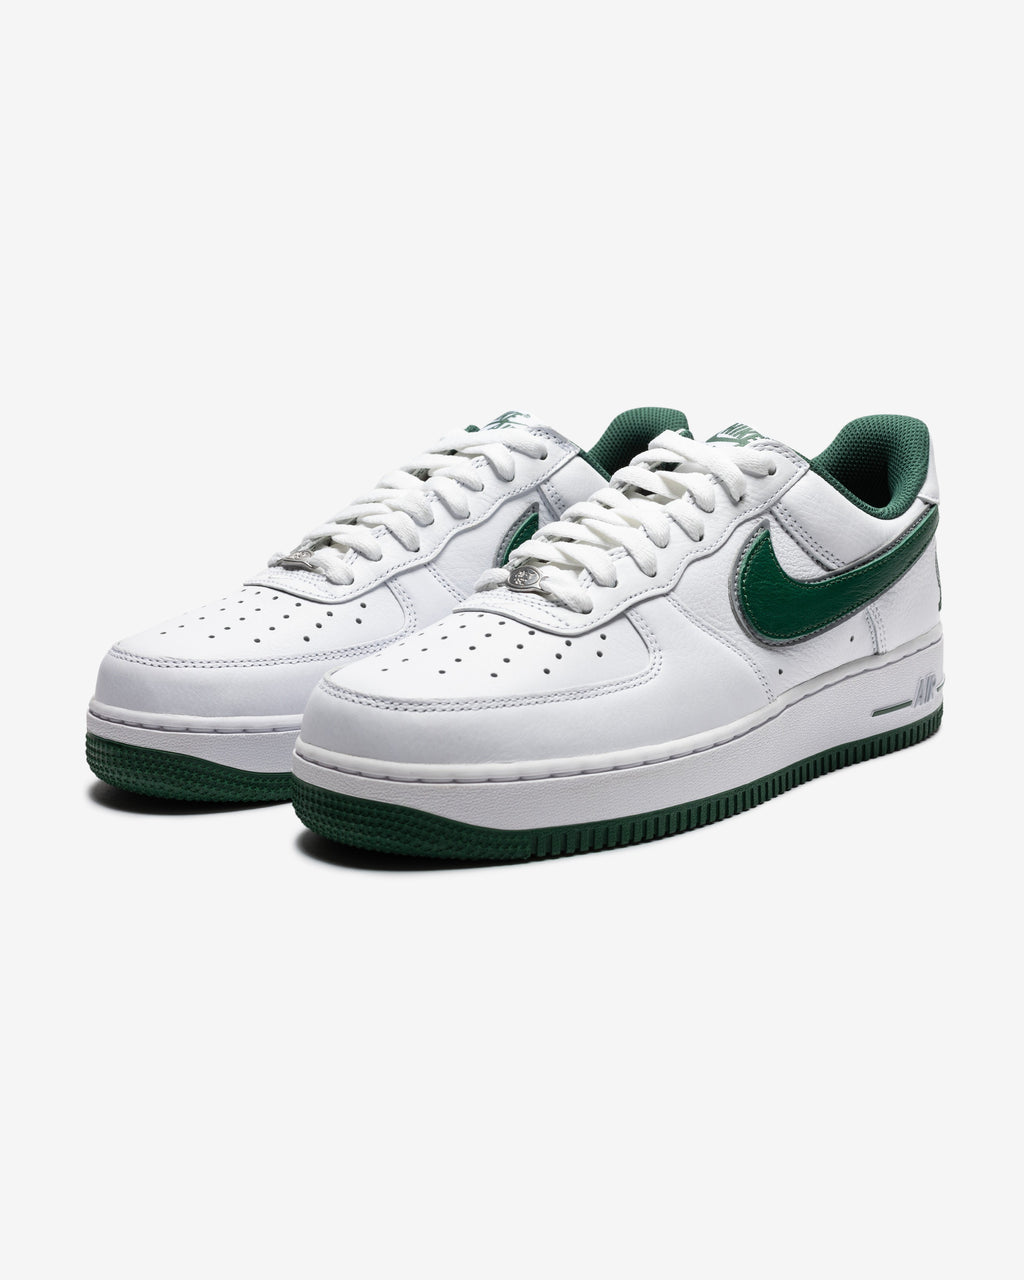 NIKE AIR FORCE 1 LOW - WHITE/ DEEPFOREST